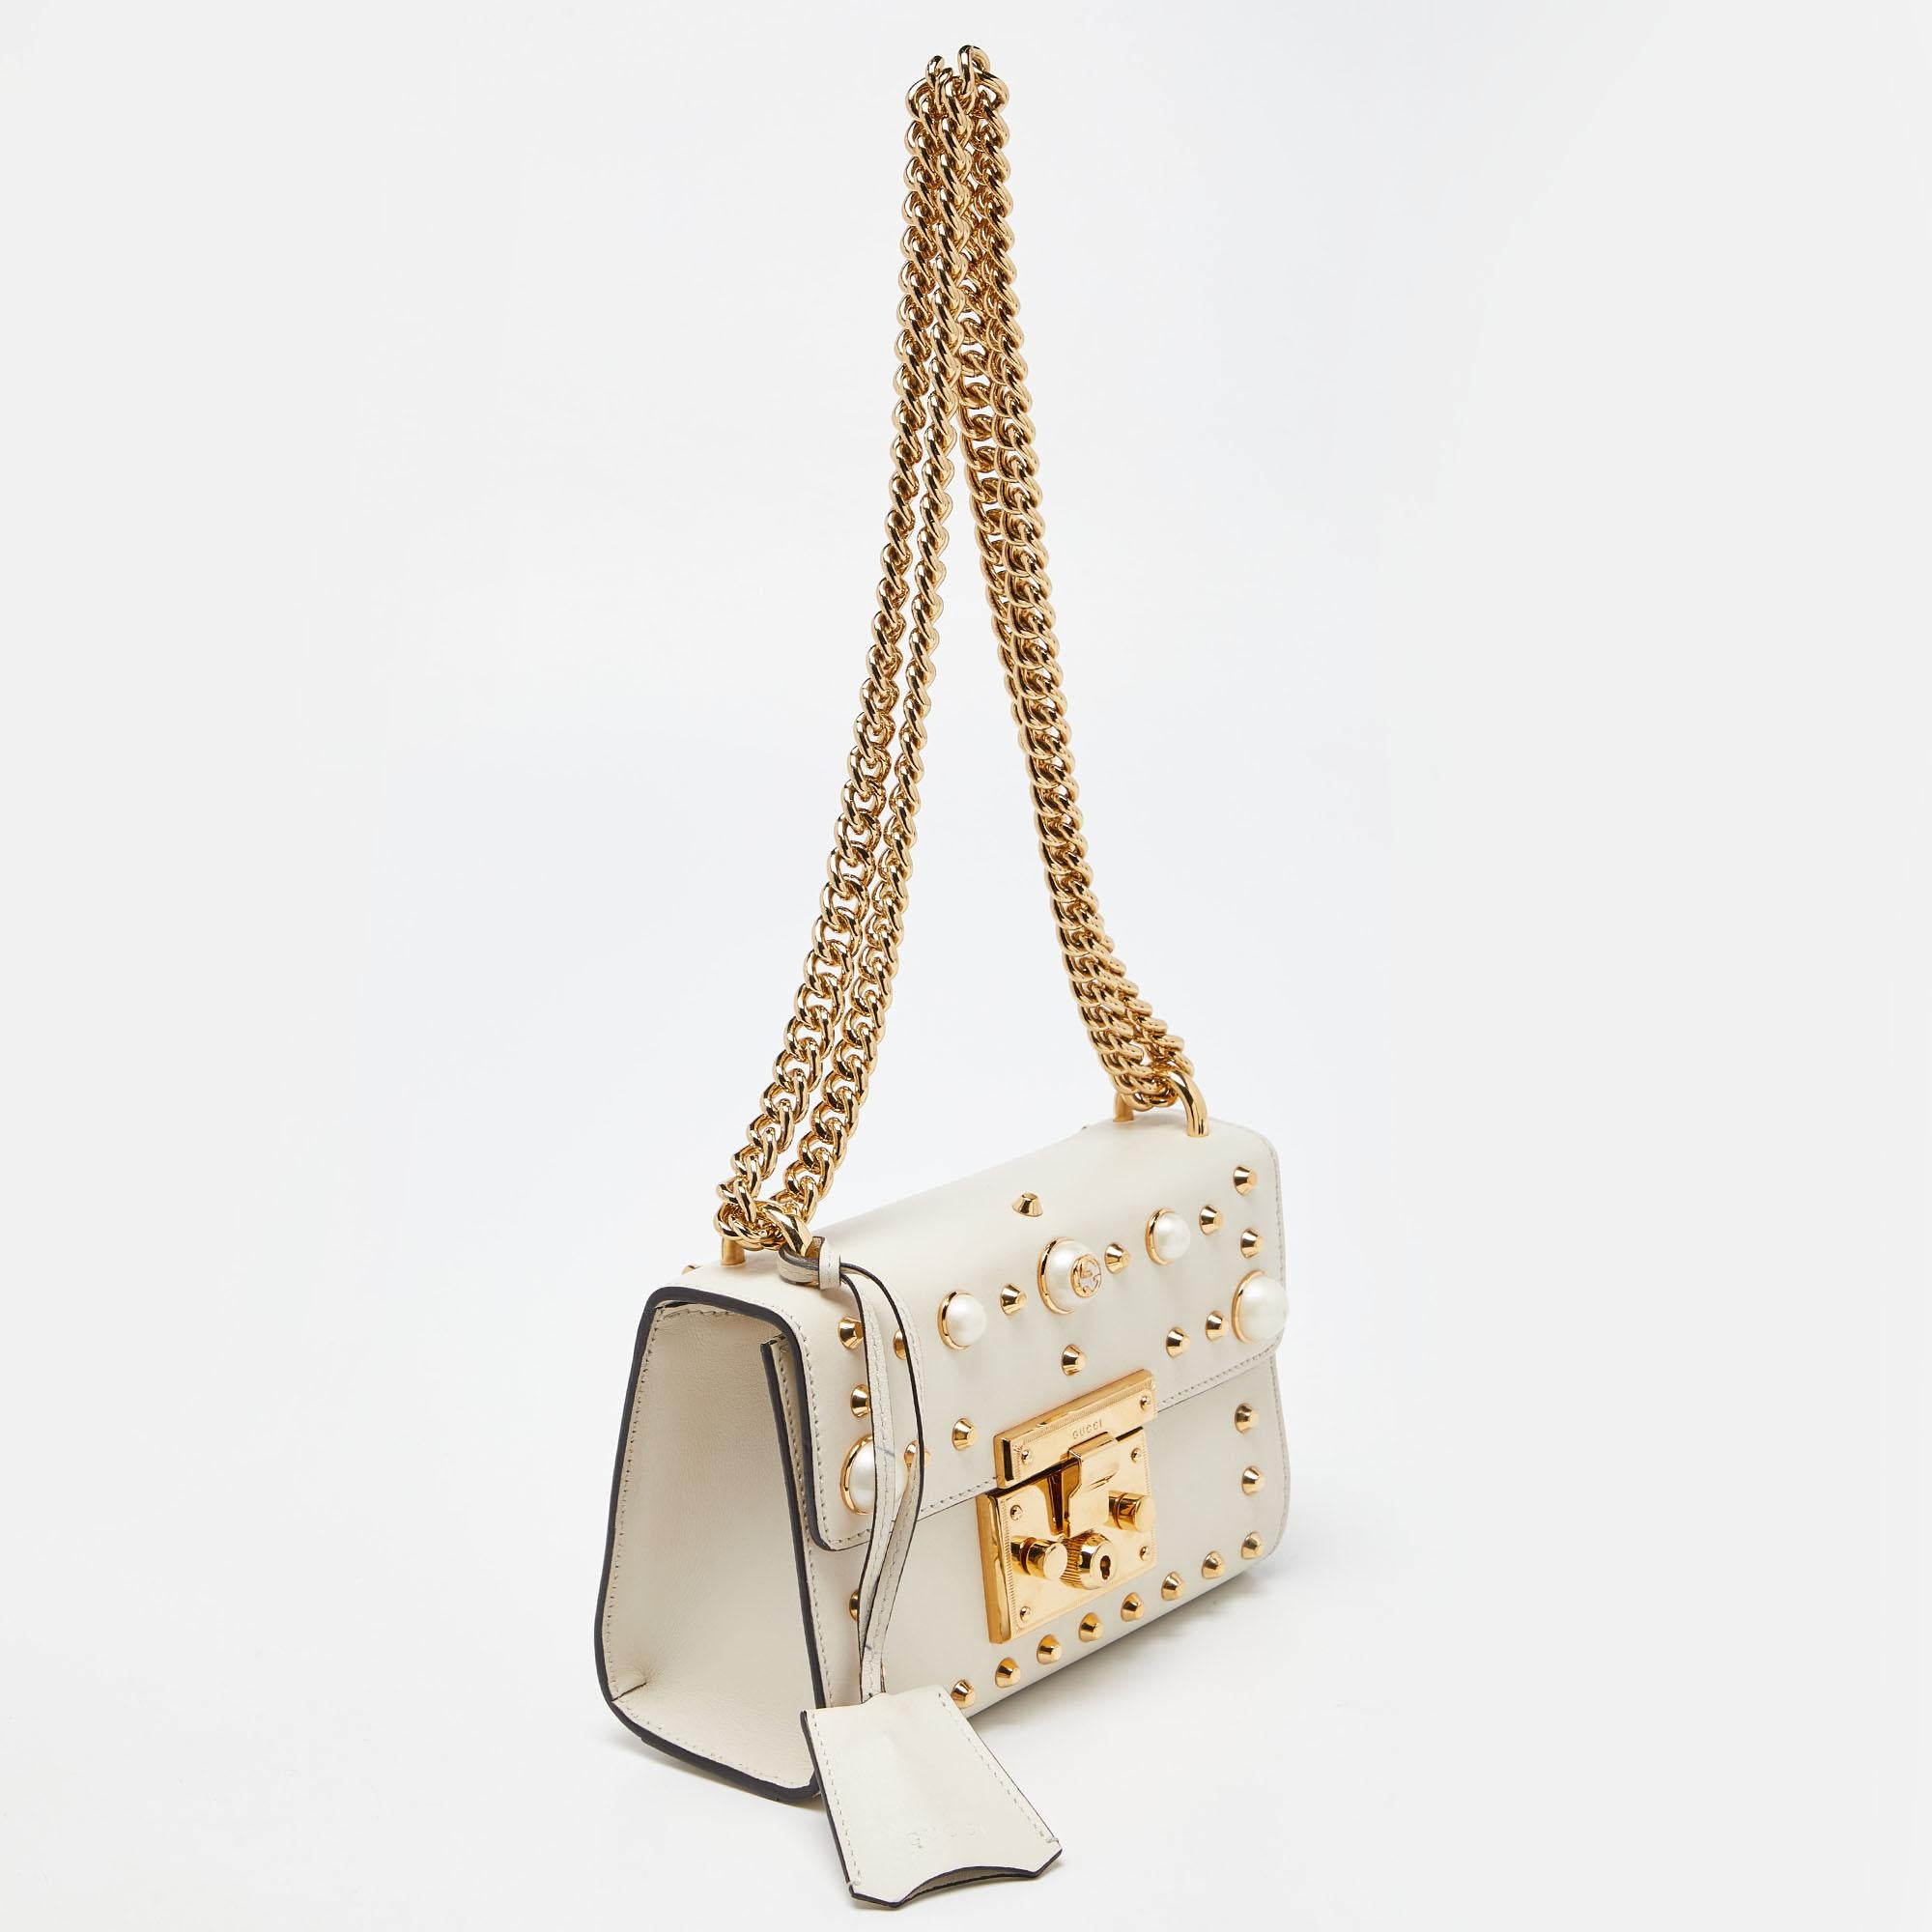 Gucci Beige Leather Small Pearl Studded Padlock Shoulder Bag In Good Condition For Sale In Dubai, Al Qouz 2